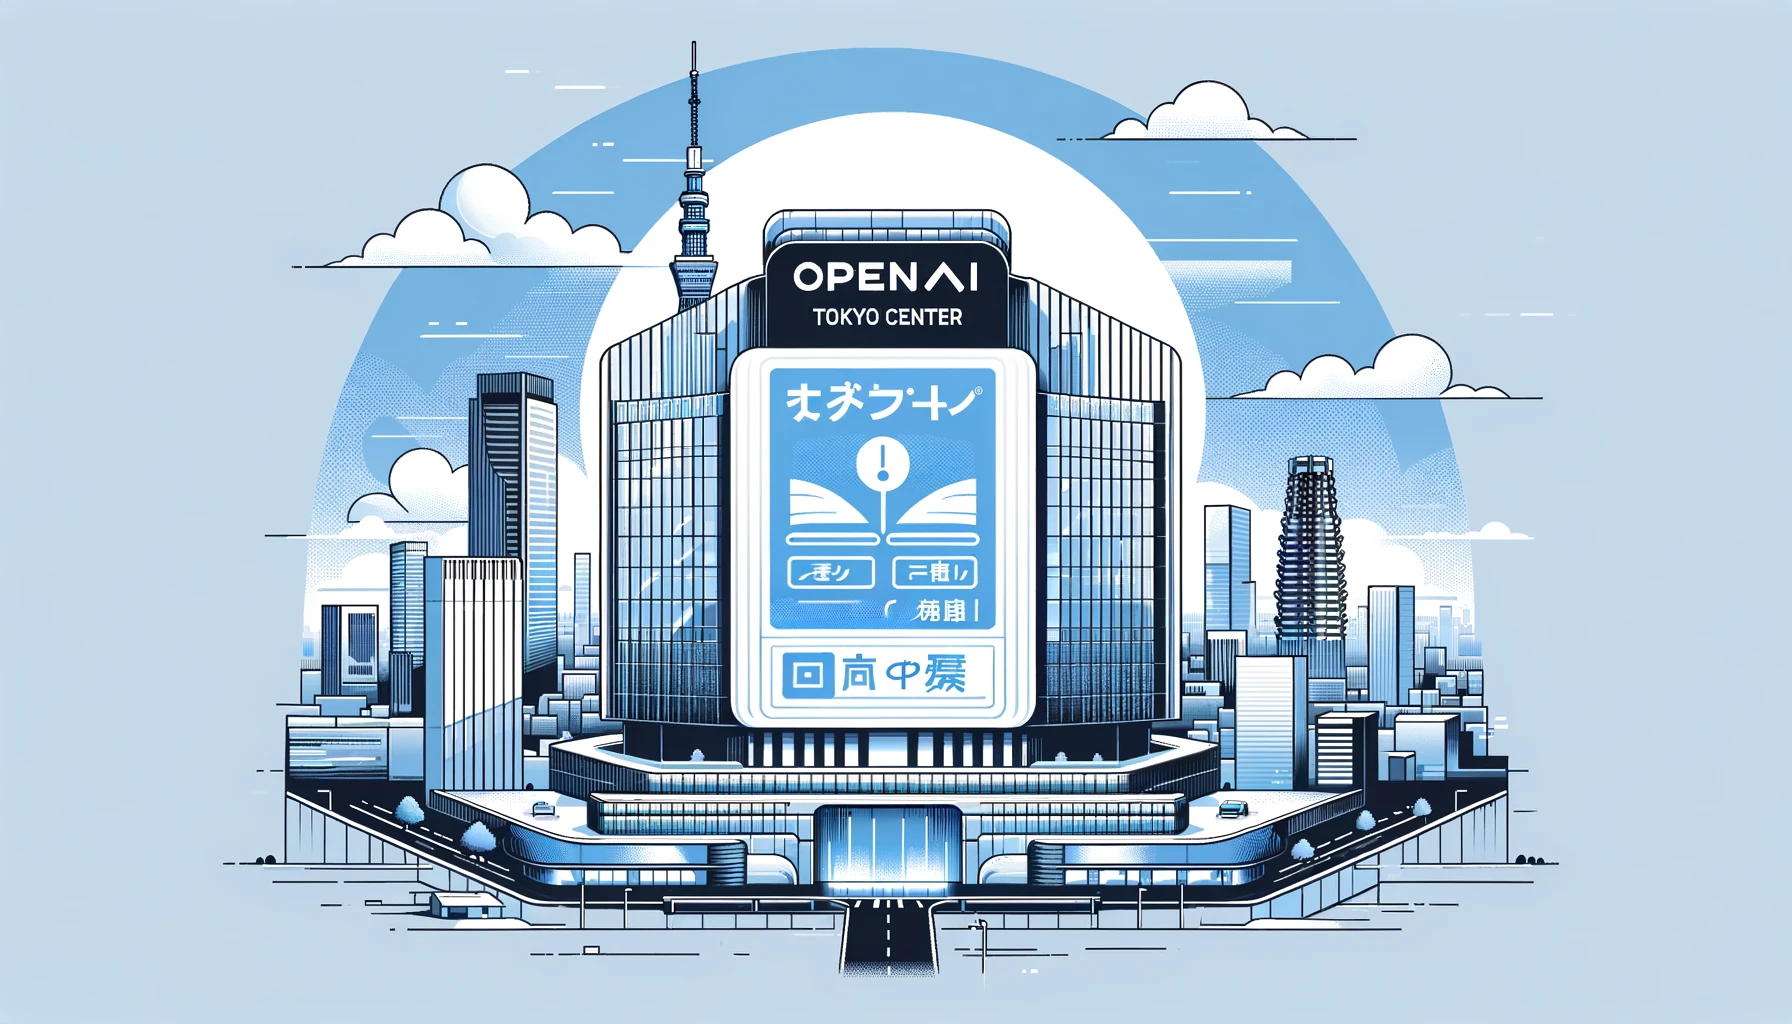 OpenAI launches Tokyo center, introduces GPT-4 version tailored for Japanese